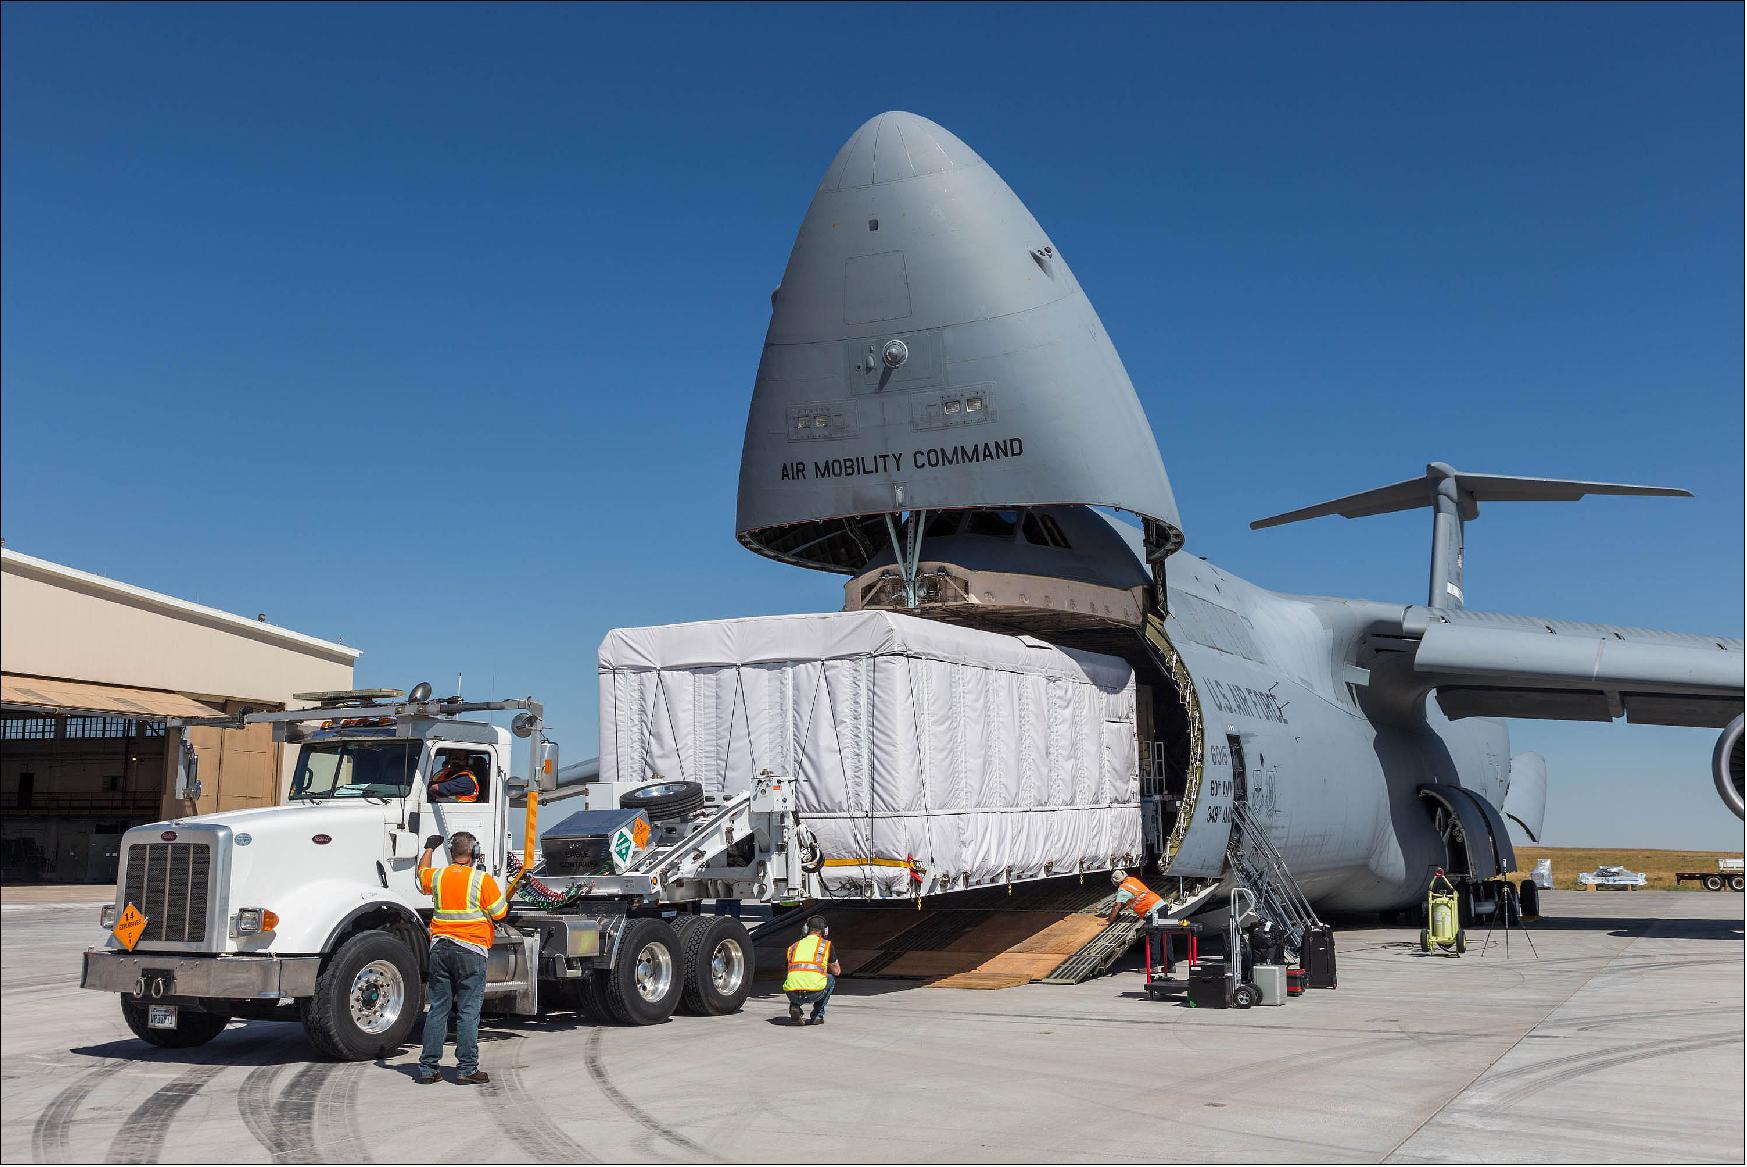 Figure 14: Lockheed Martin delivered NOAA's GOES-R weather satellite to its Florida launch site on Aug. 22, 2016. The spacecraft was shipped aboard a U.S. Air Force C-5M Super Galaxy cargo plane from Buckley Air Force Base, Colorado to NASA's Kennedy Space Center, Florida. The satellite will now undergo final processing in preparation for a November launch (image credit: Lockheed Martin, NOAA, Space Daily)